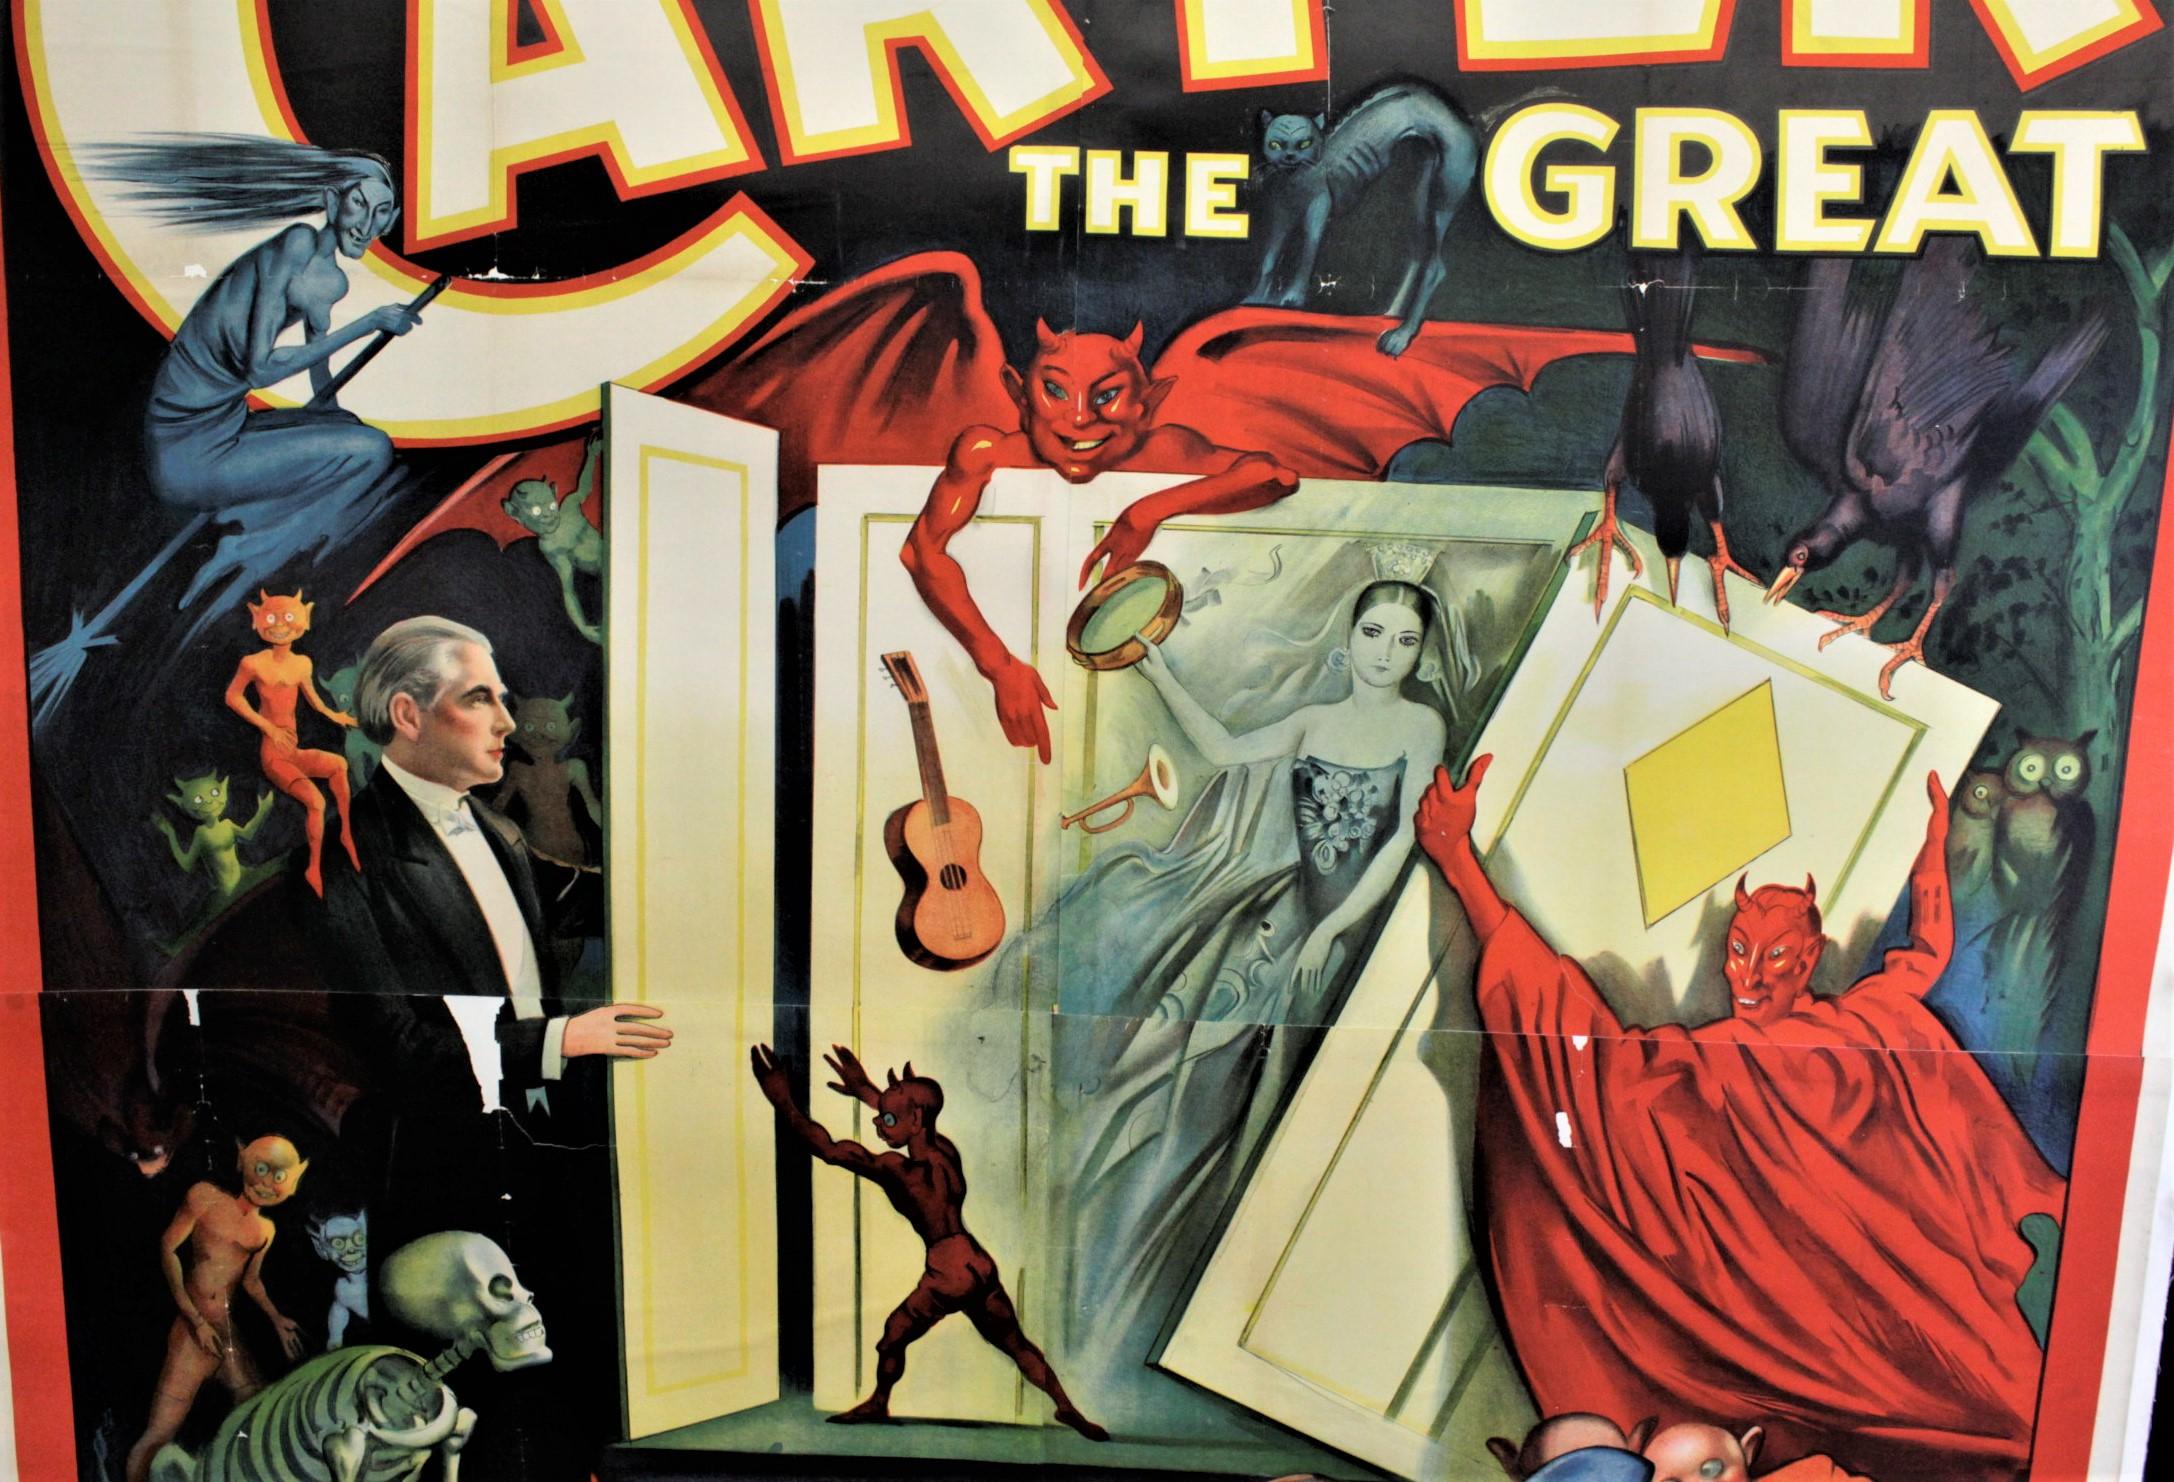 American Huge Original Art Deco 'Carter the Great' the Magician Travelling Show Poster